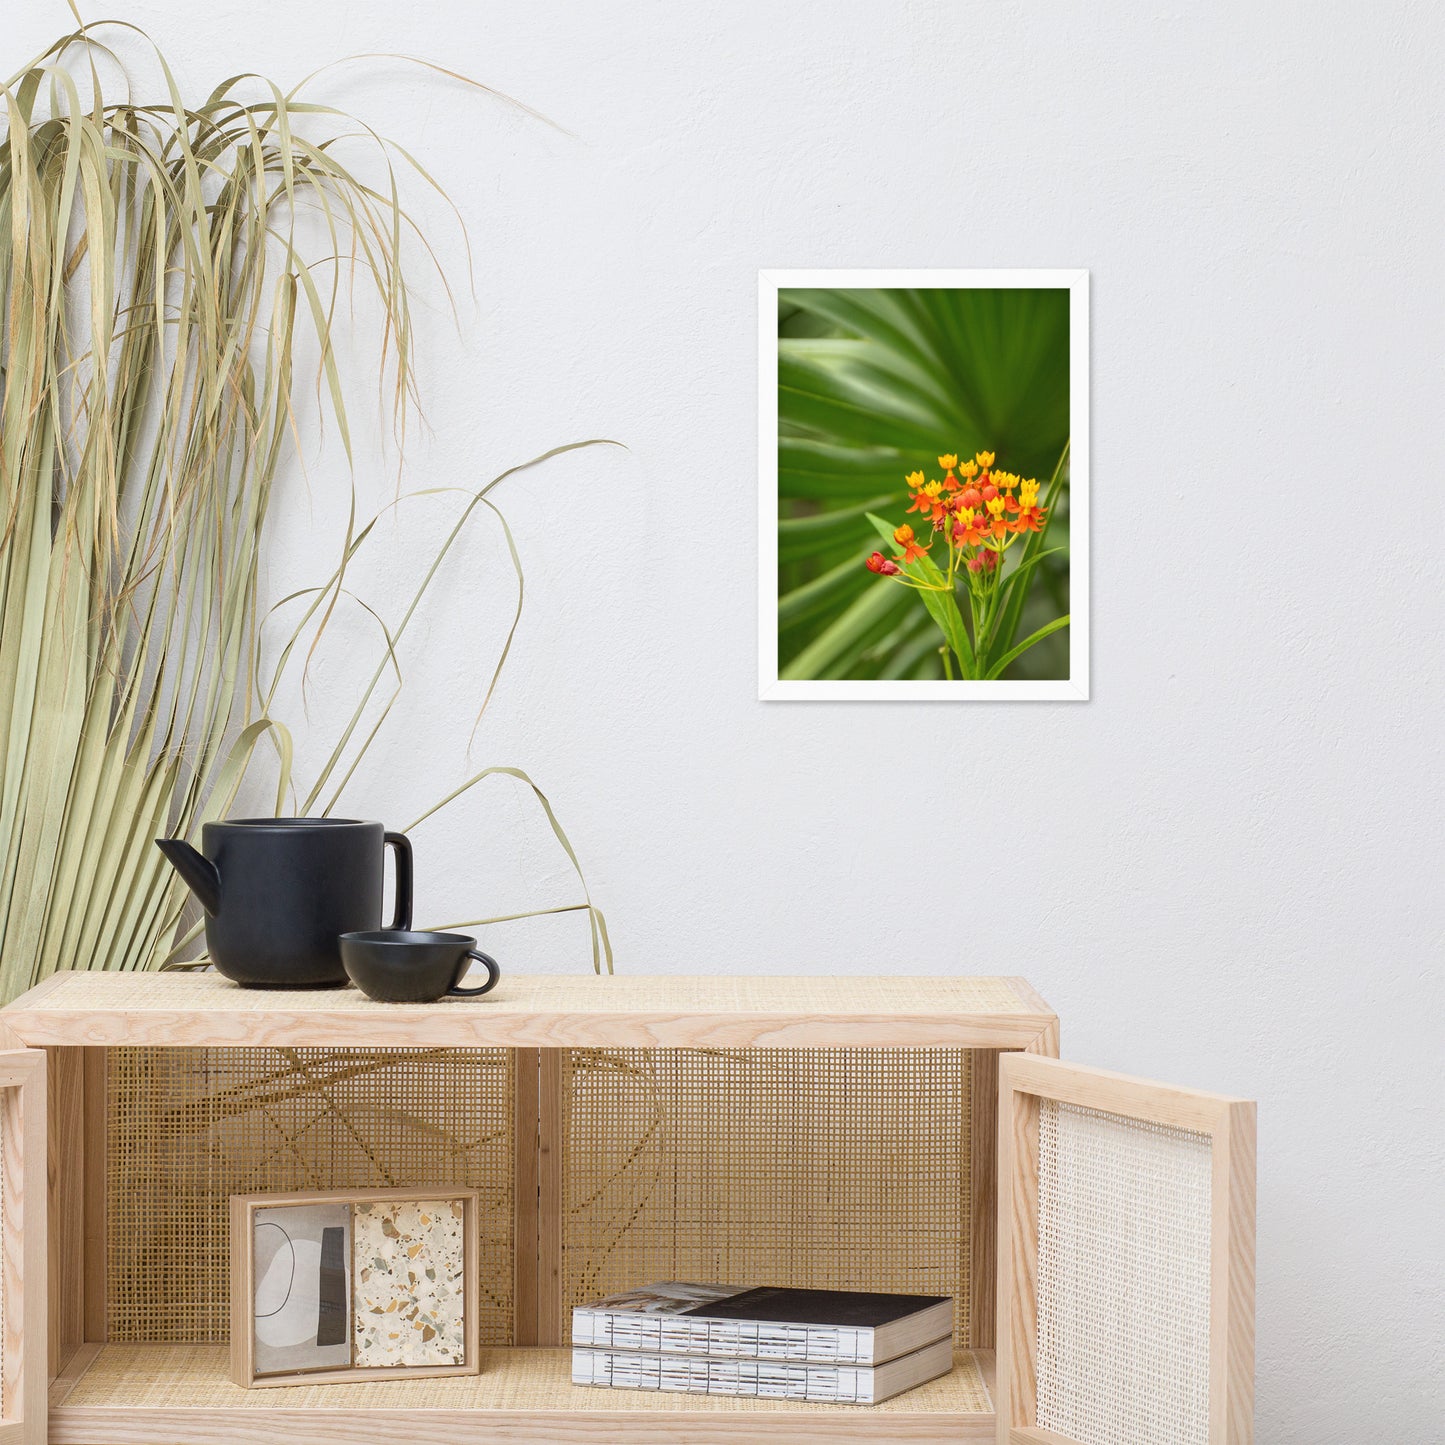 Bloodflowers and Palm Color Floral Nature Photo Framed Wall Art Print